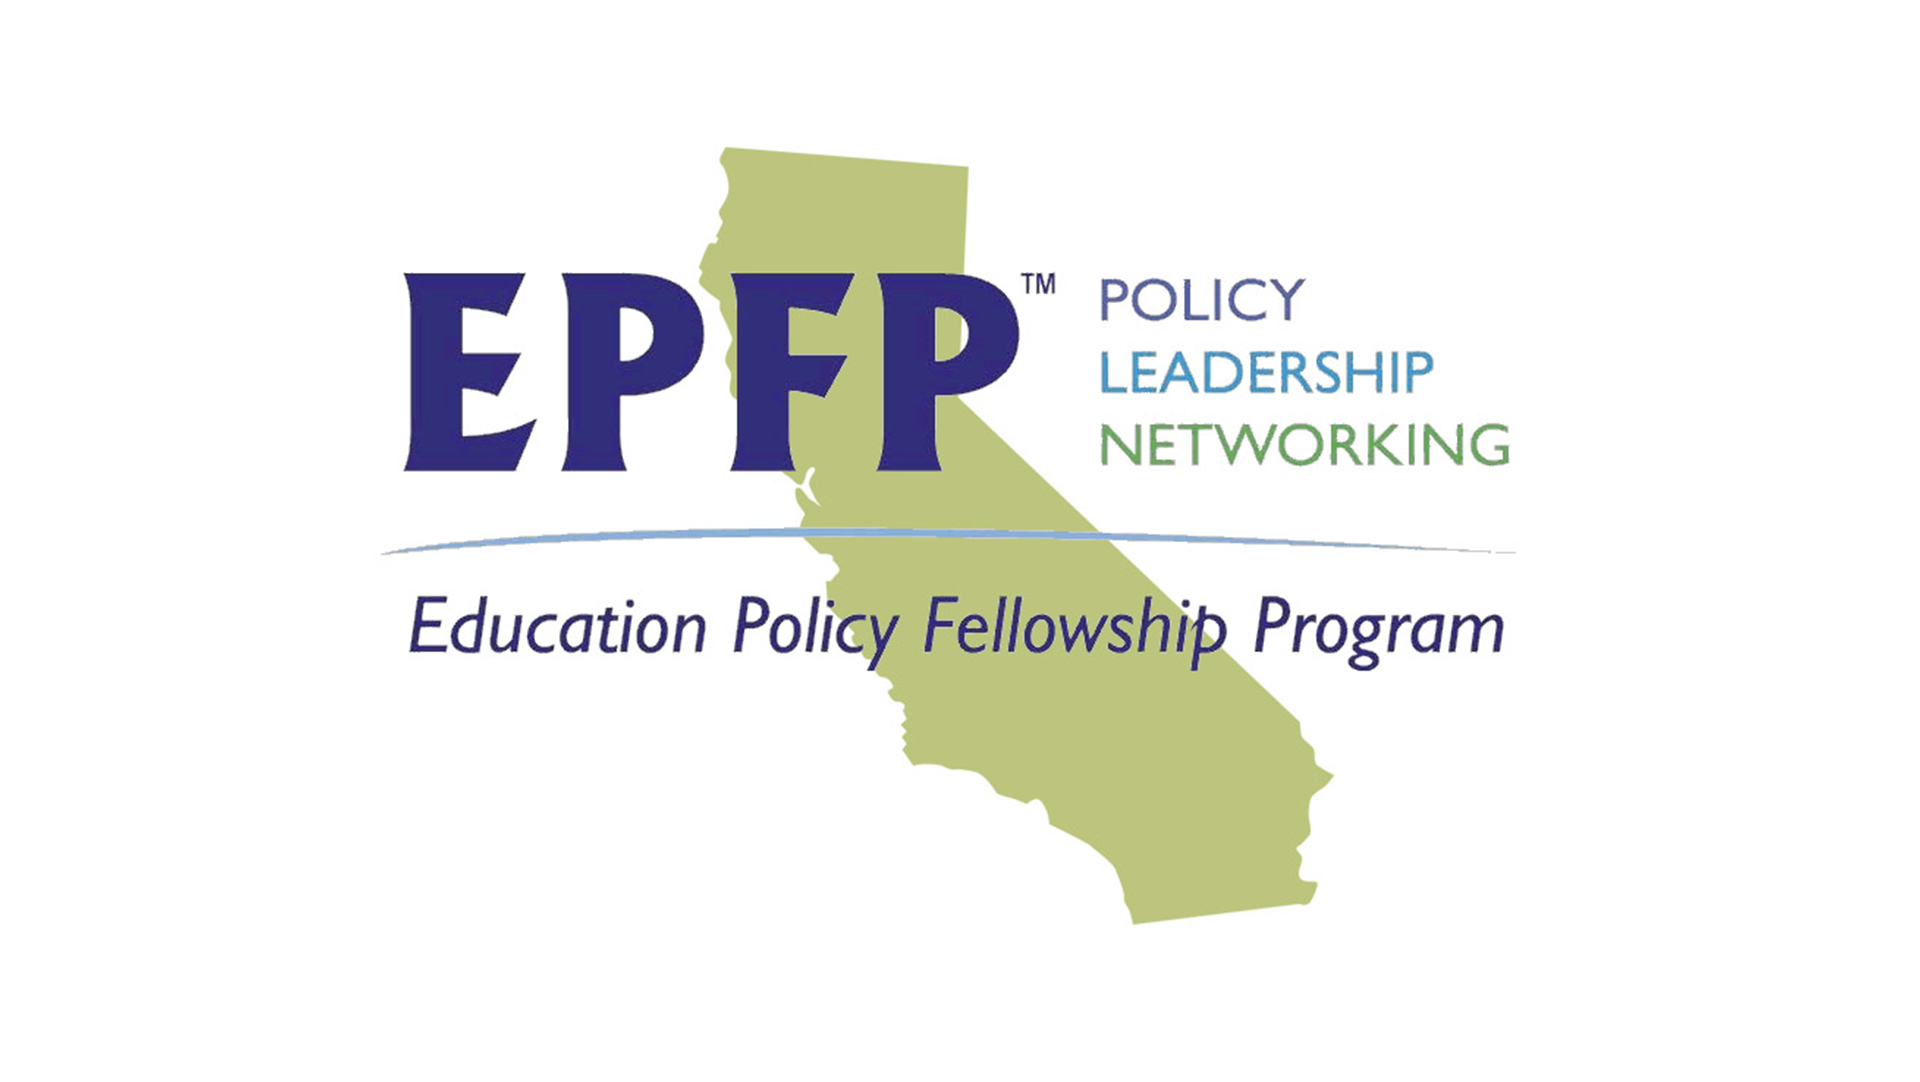 EPFP. Education Policy Fellowship Program. Policy, Leadership, Networking